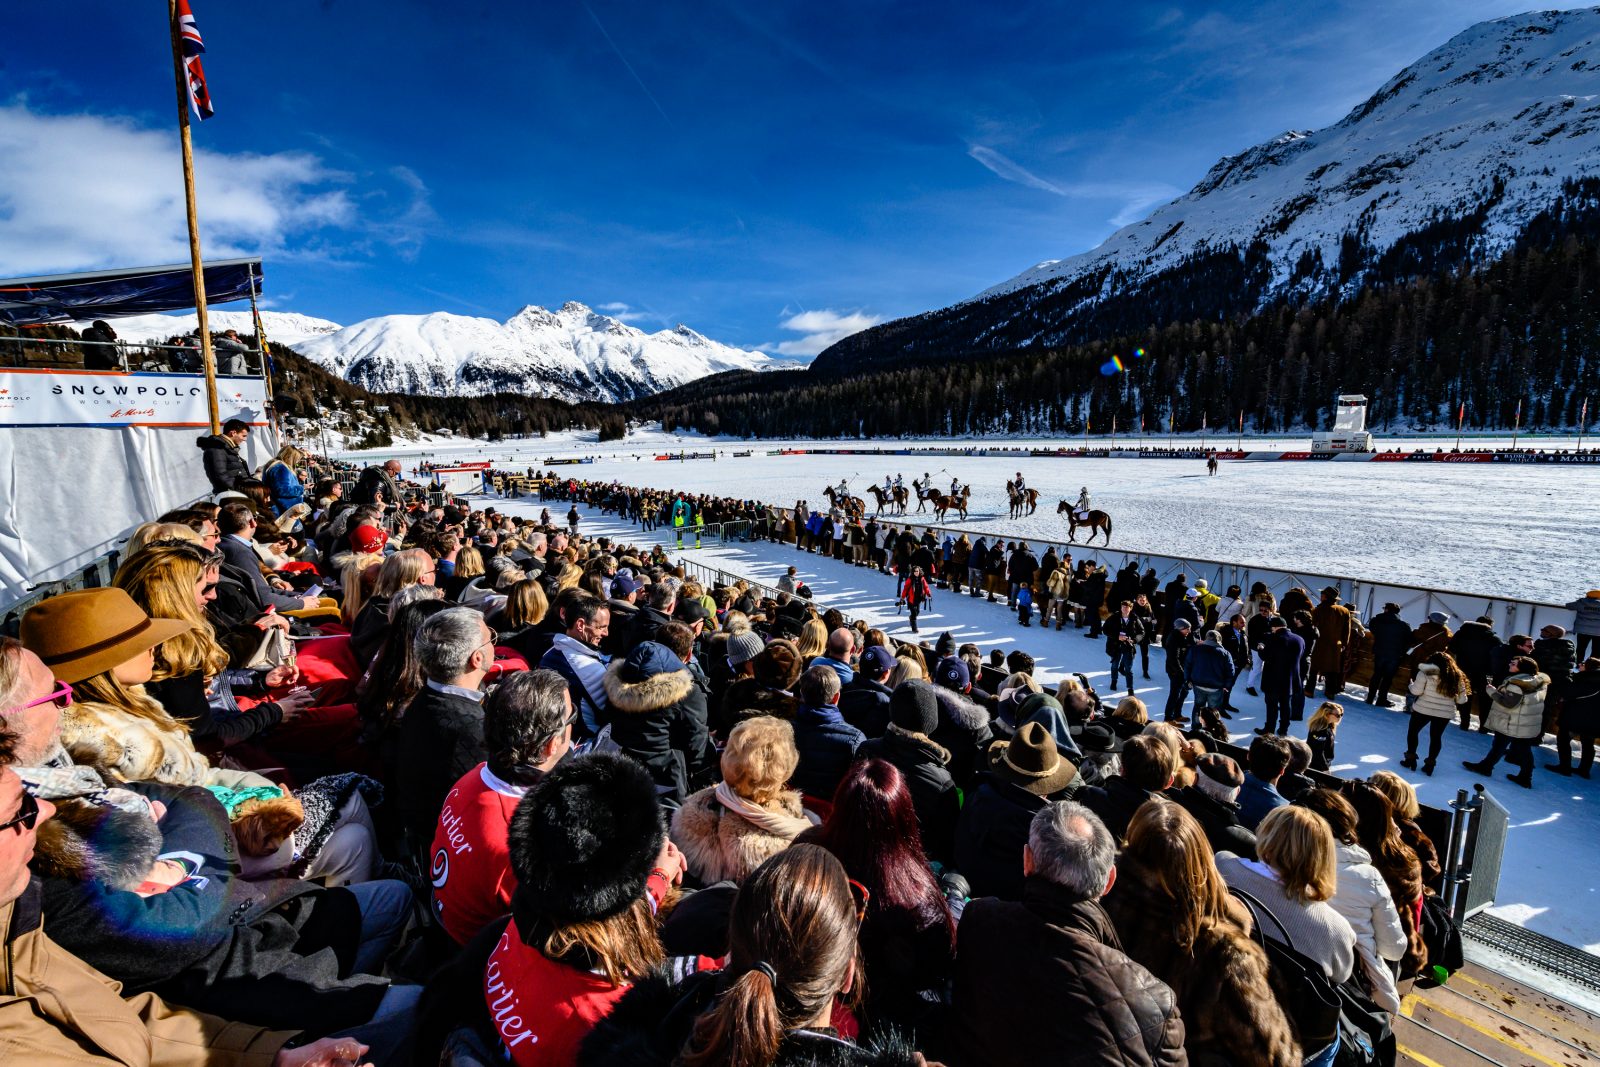 15-facts-about-st-moritz-snow-polo-world-cup